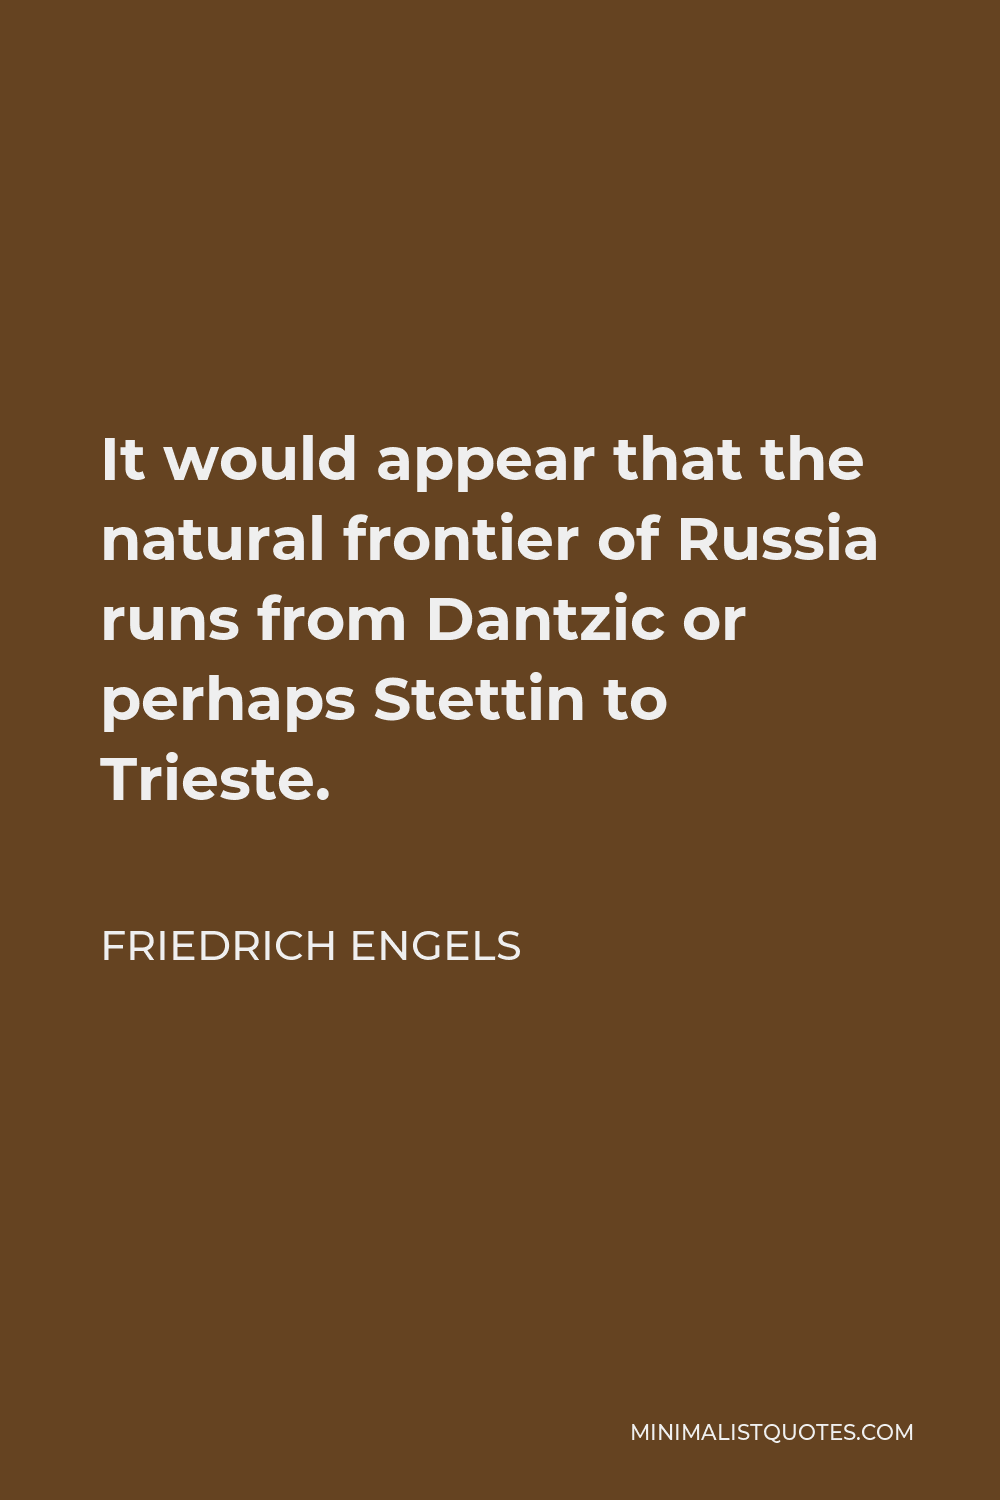 Friedrich Engels Quote - It would appear that the natural frontier of Russia runs from Dantzic or perhaps Stettin to Trieste.